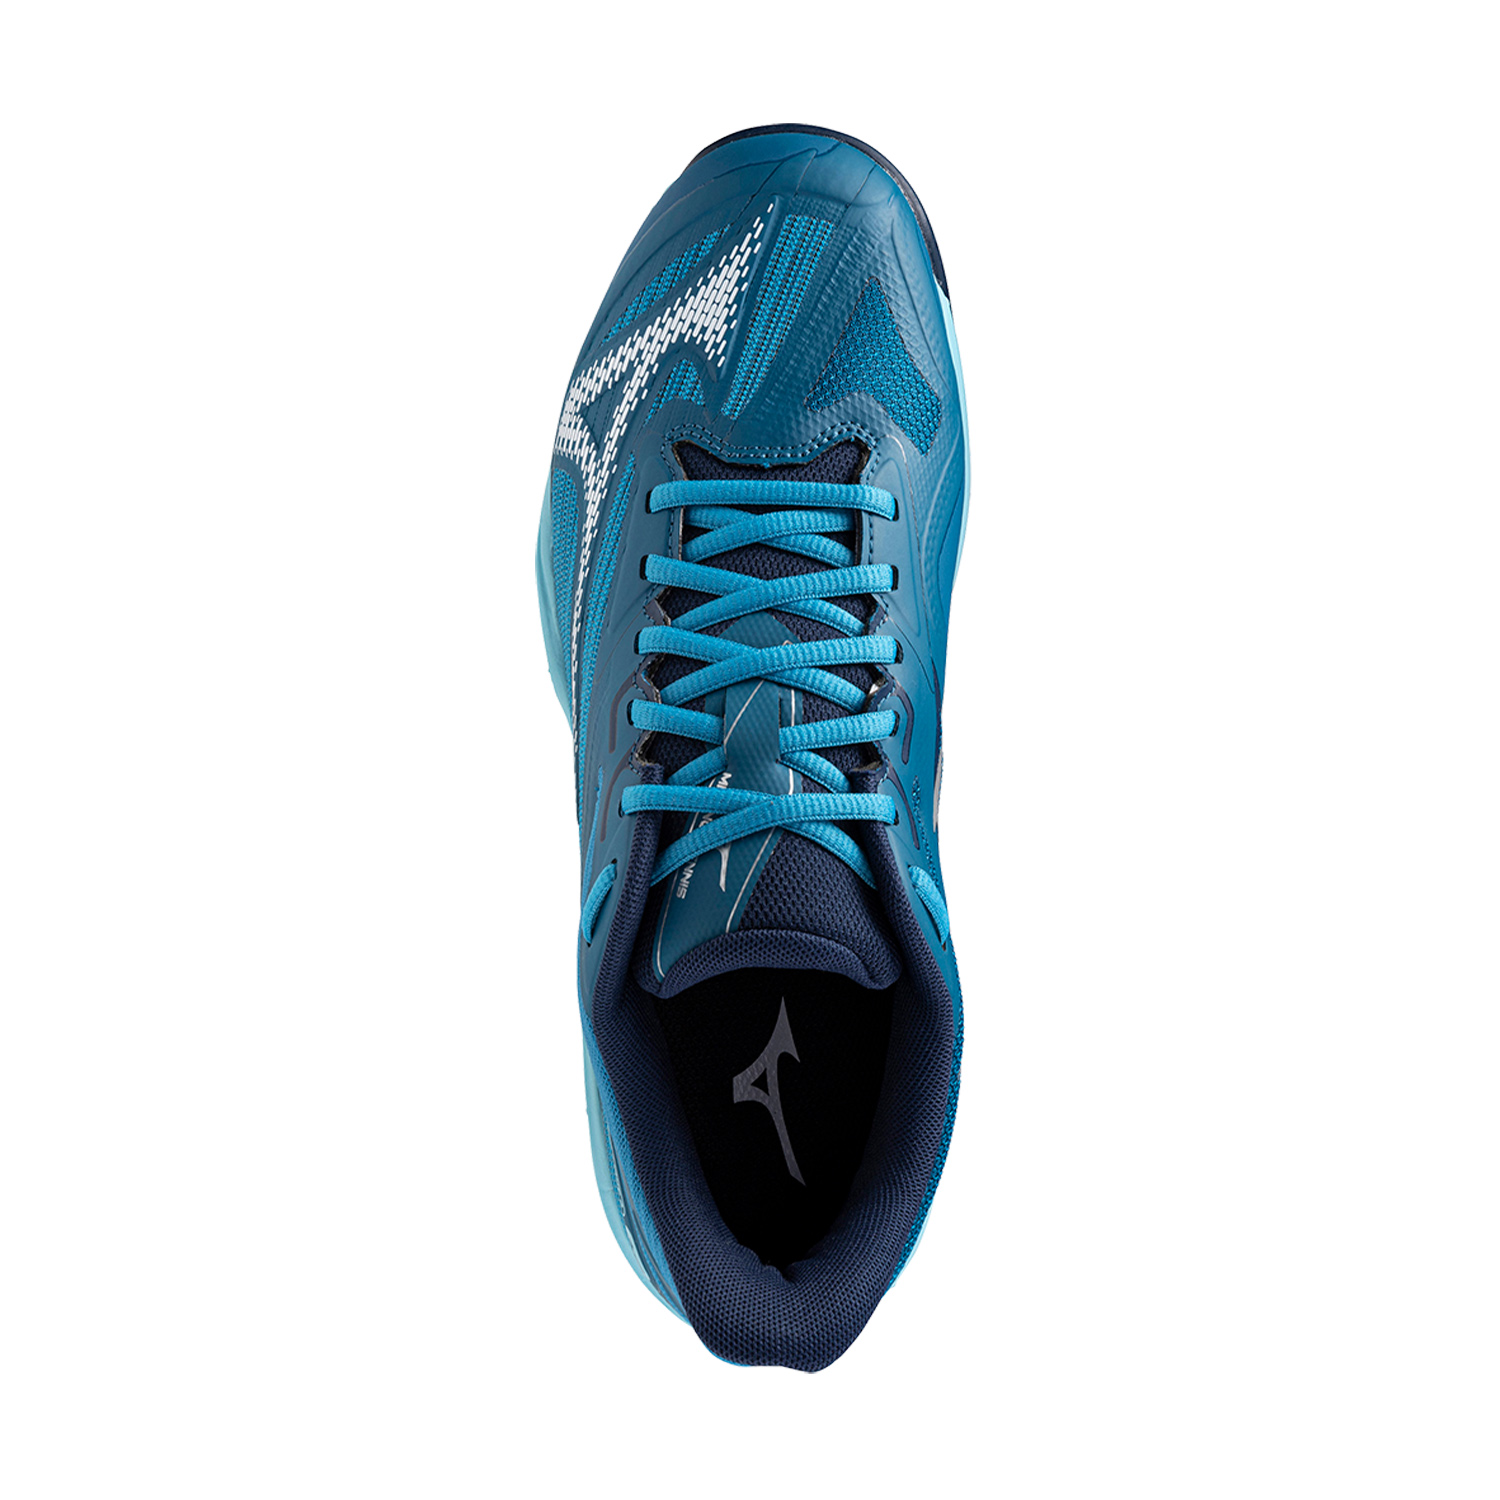 Mizuno Wave Exceed Light 2 Clay - Moroccan Blue/White/Bluejay